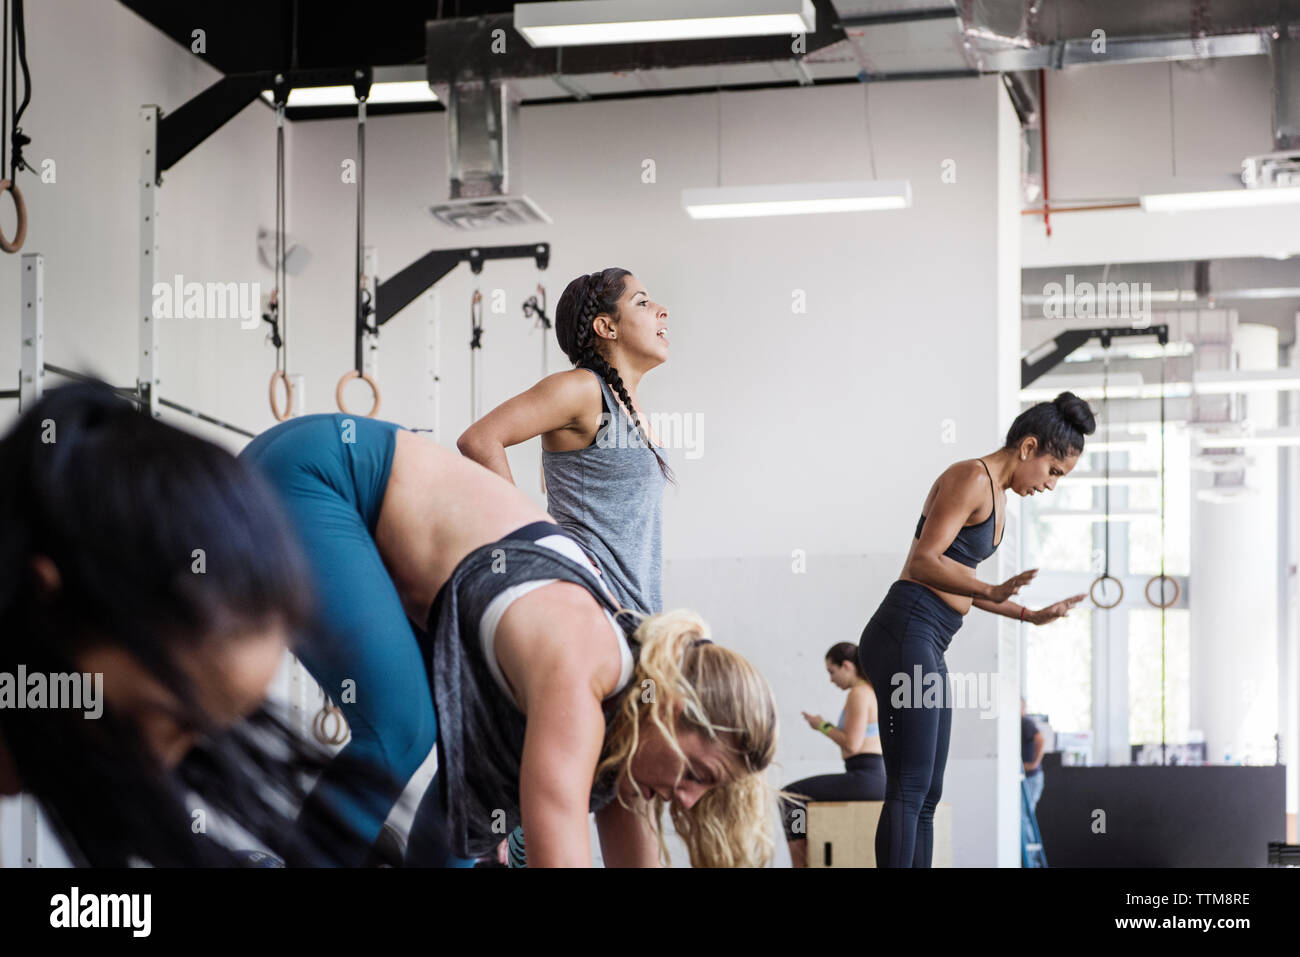 Female athletes doing burpee exercise in crossfit gym Stock Photo